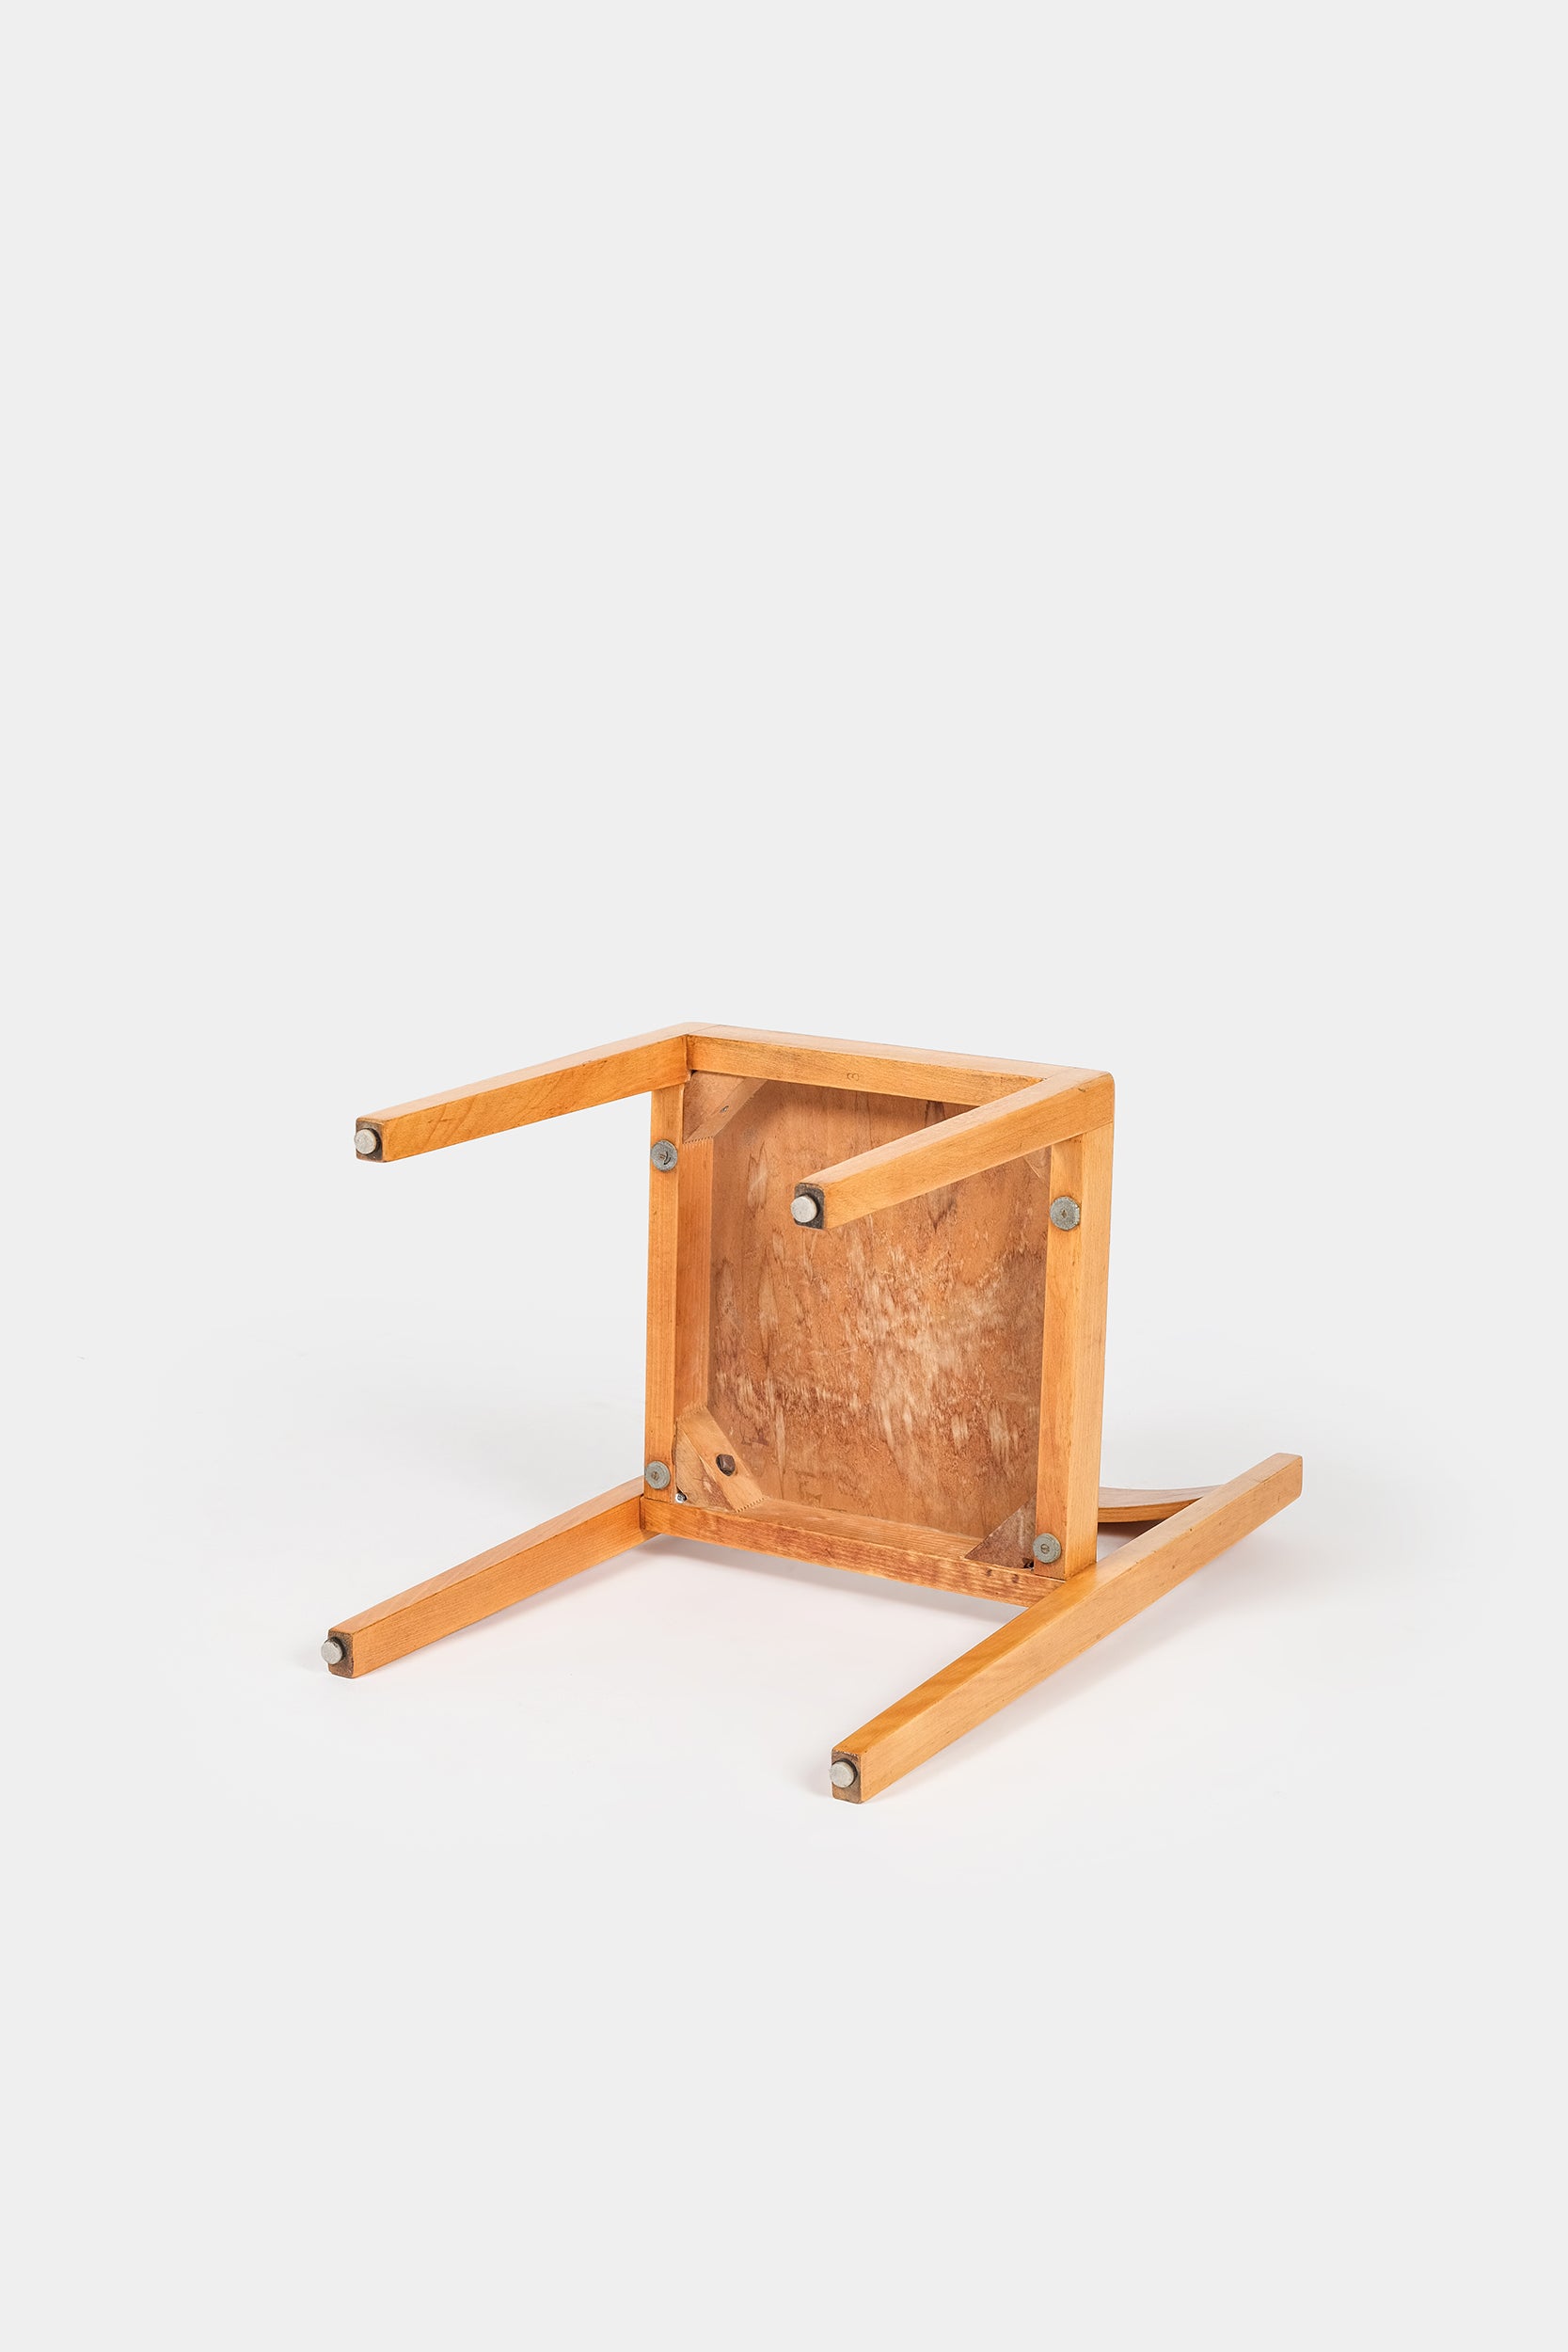 Carl Auböck, 4 Chairs, Stackable, 1956